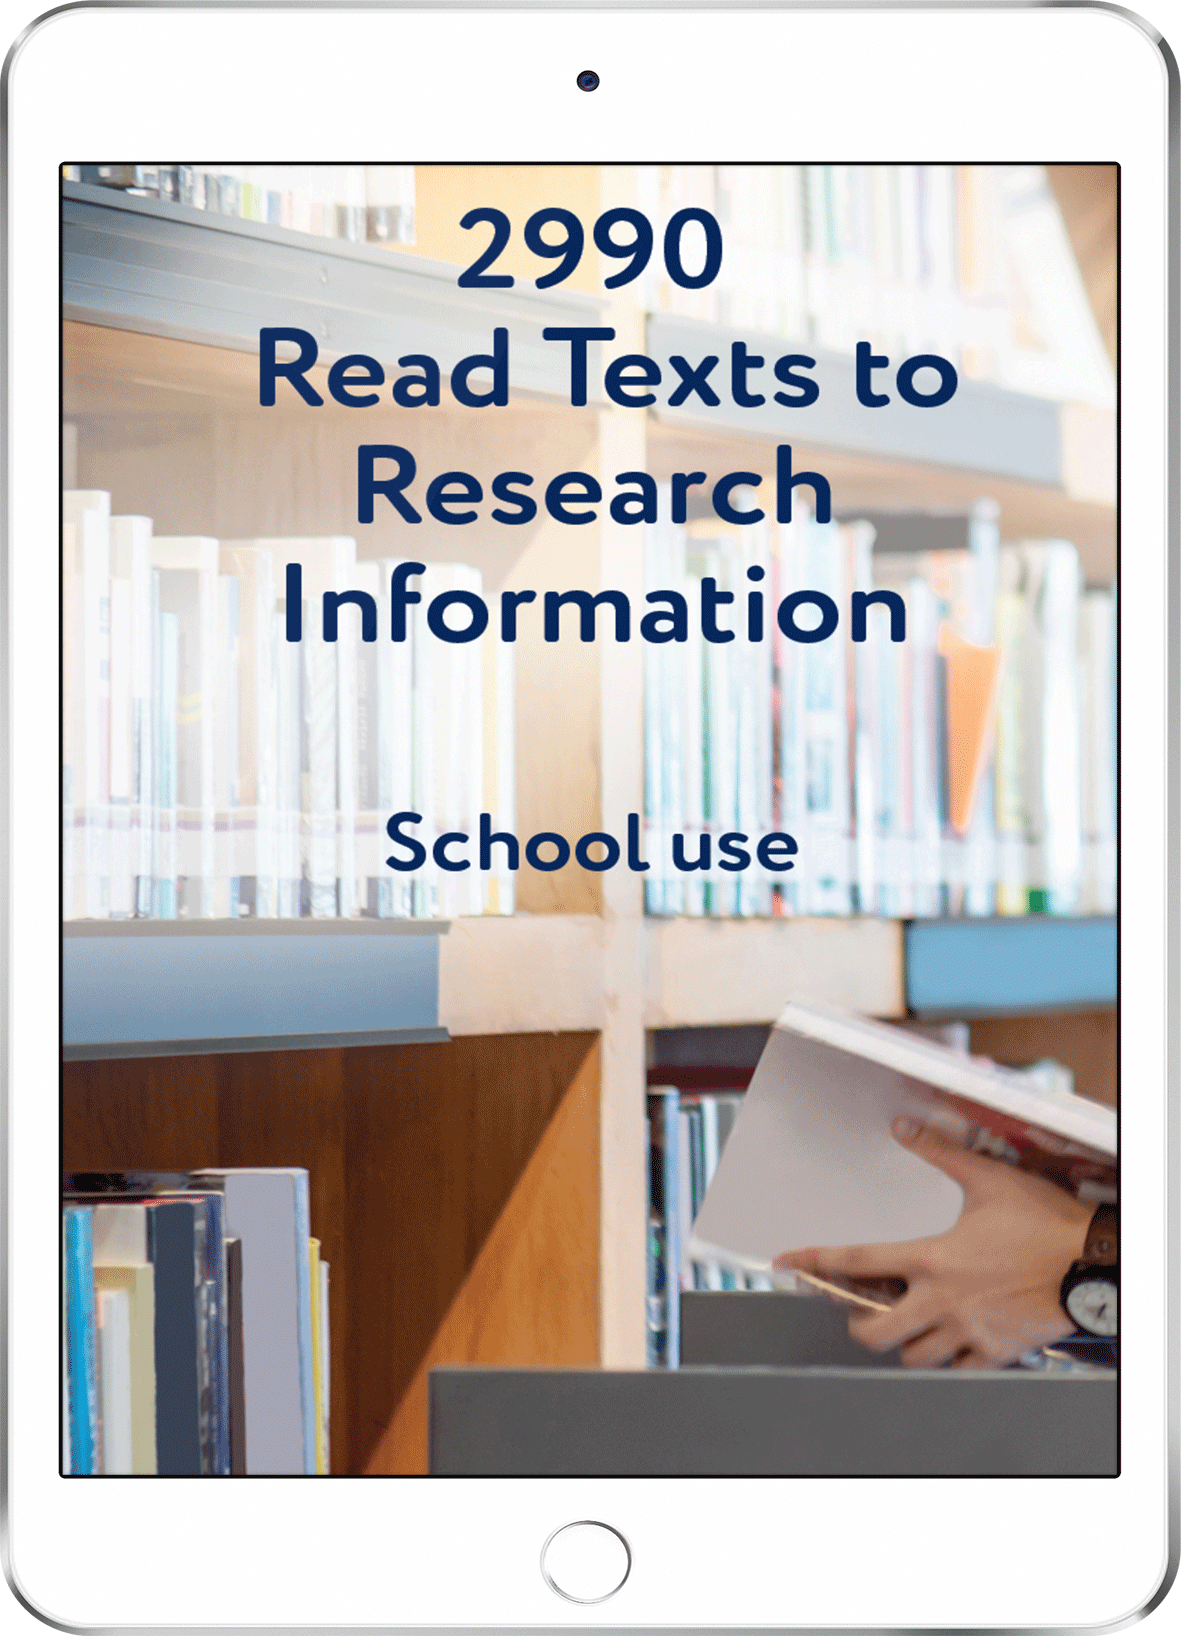 2990 v7 Read Texts to Research Information - School Use